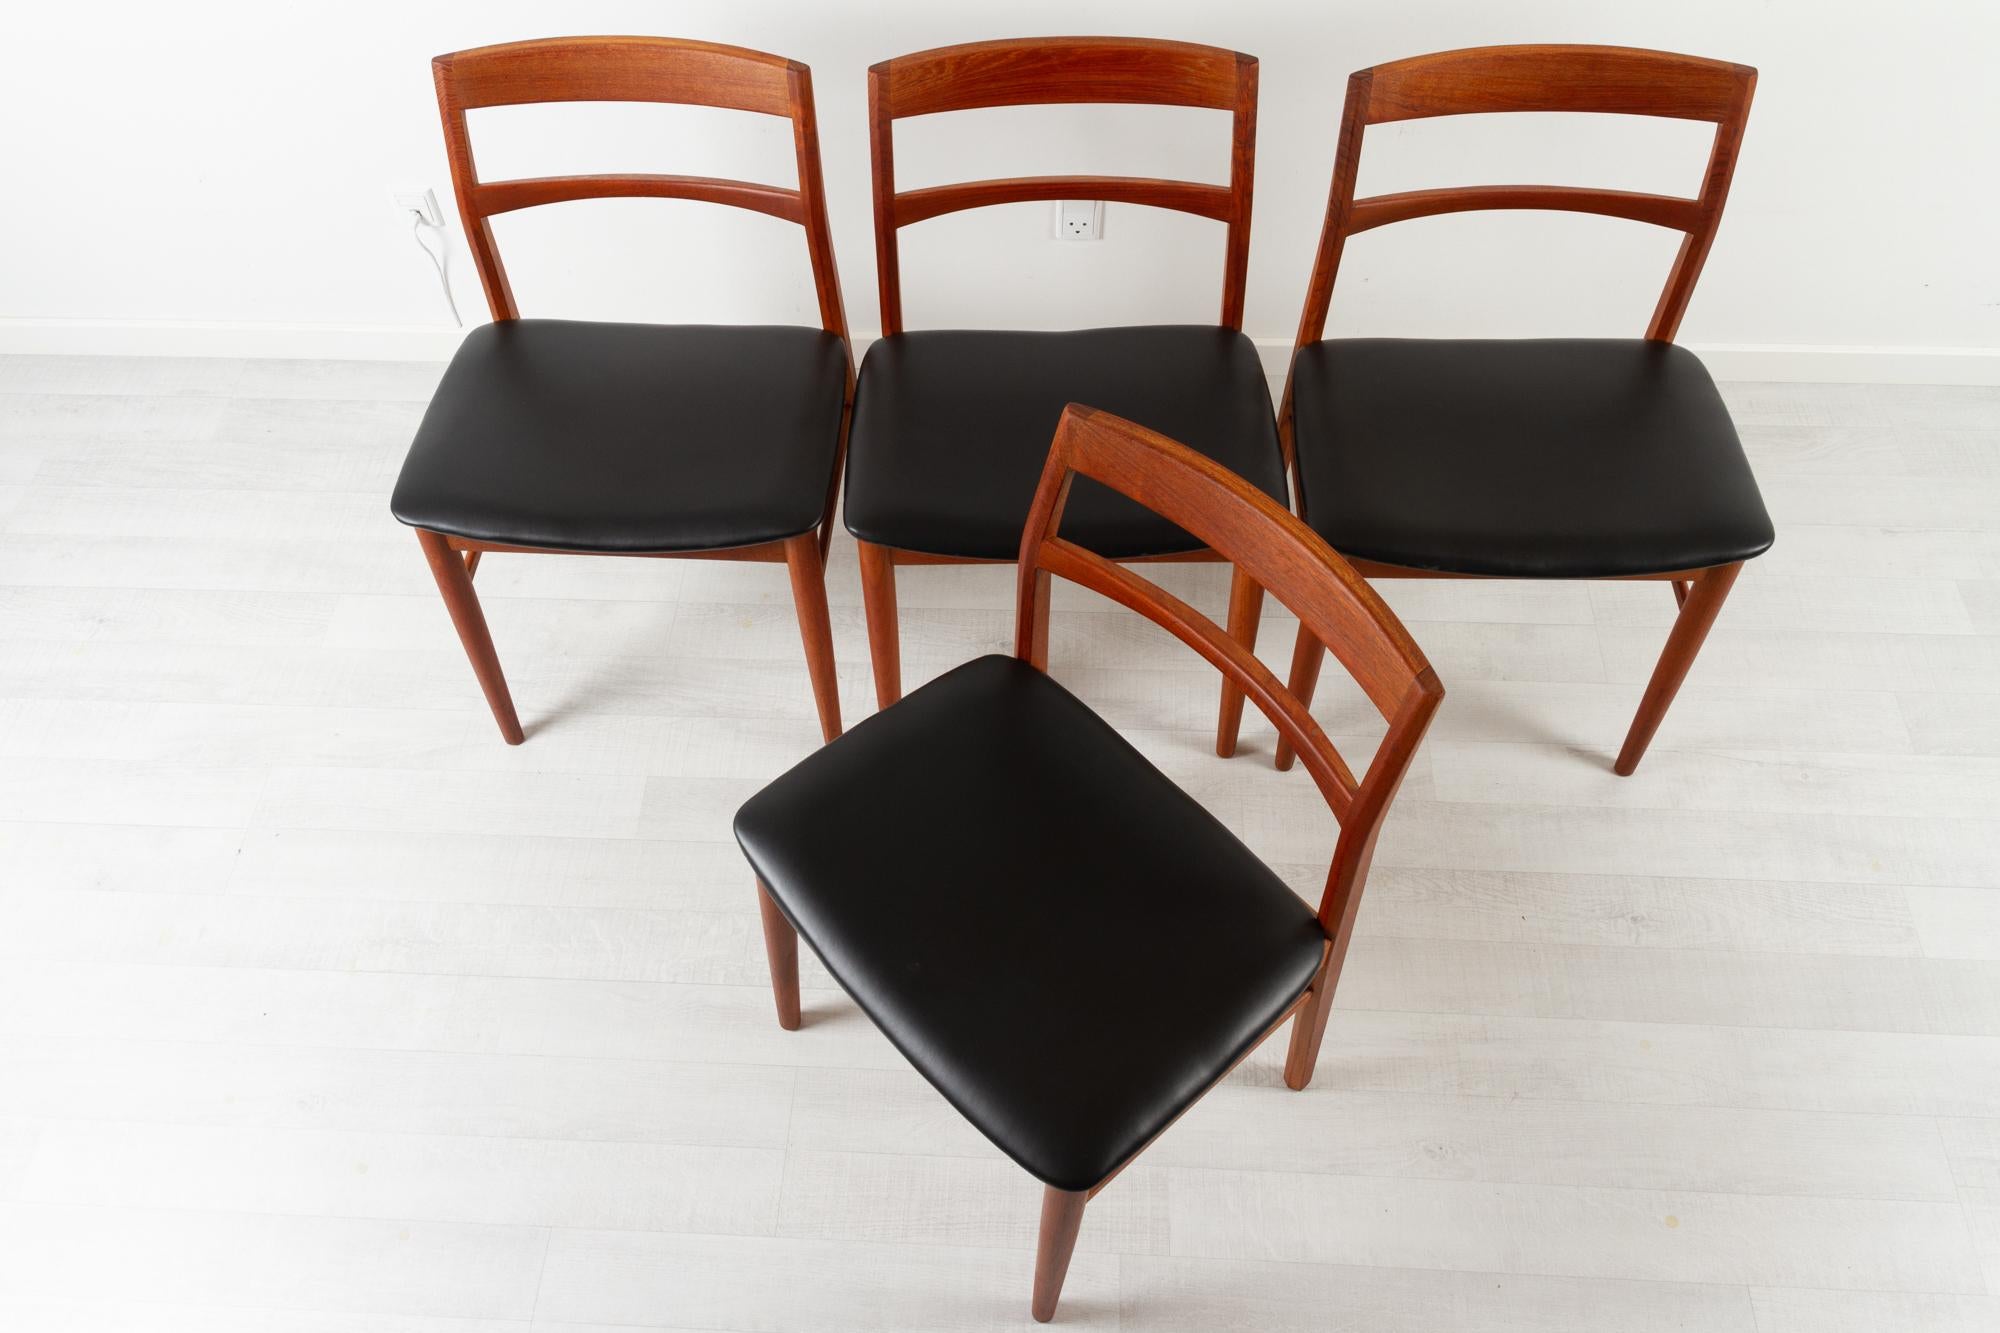 Vintage Danish Teak Dining Chairs by Kjærnulf for Vejle Møbelfabrik, 1960s In Good Condition For Sale In Asaa, DK